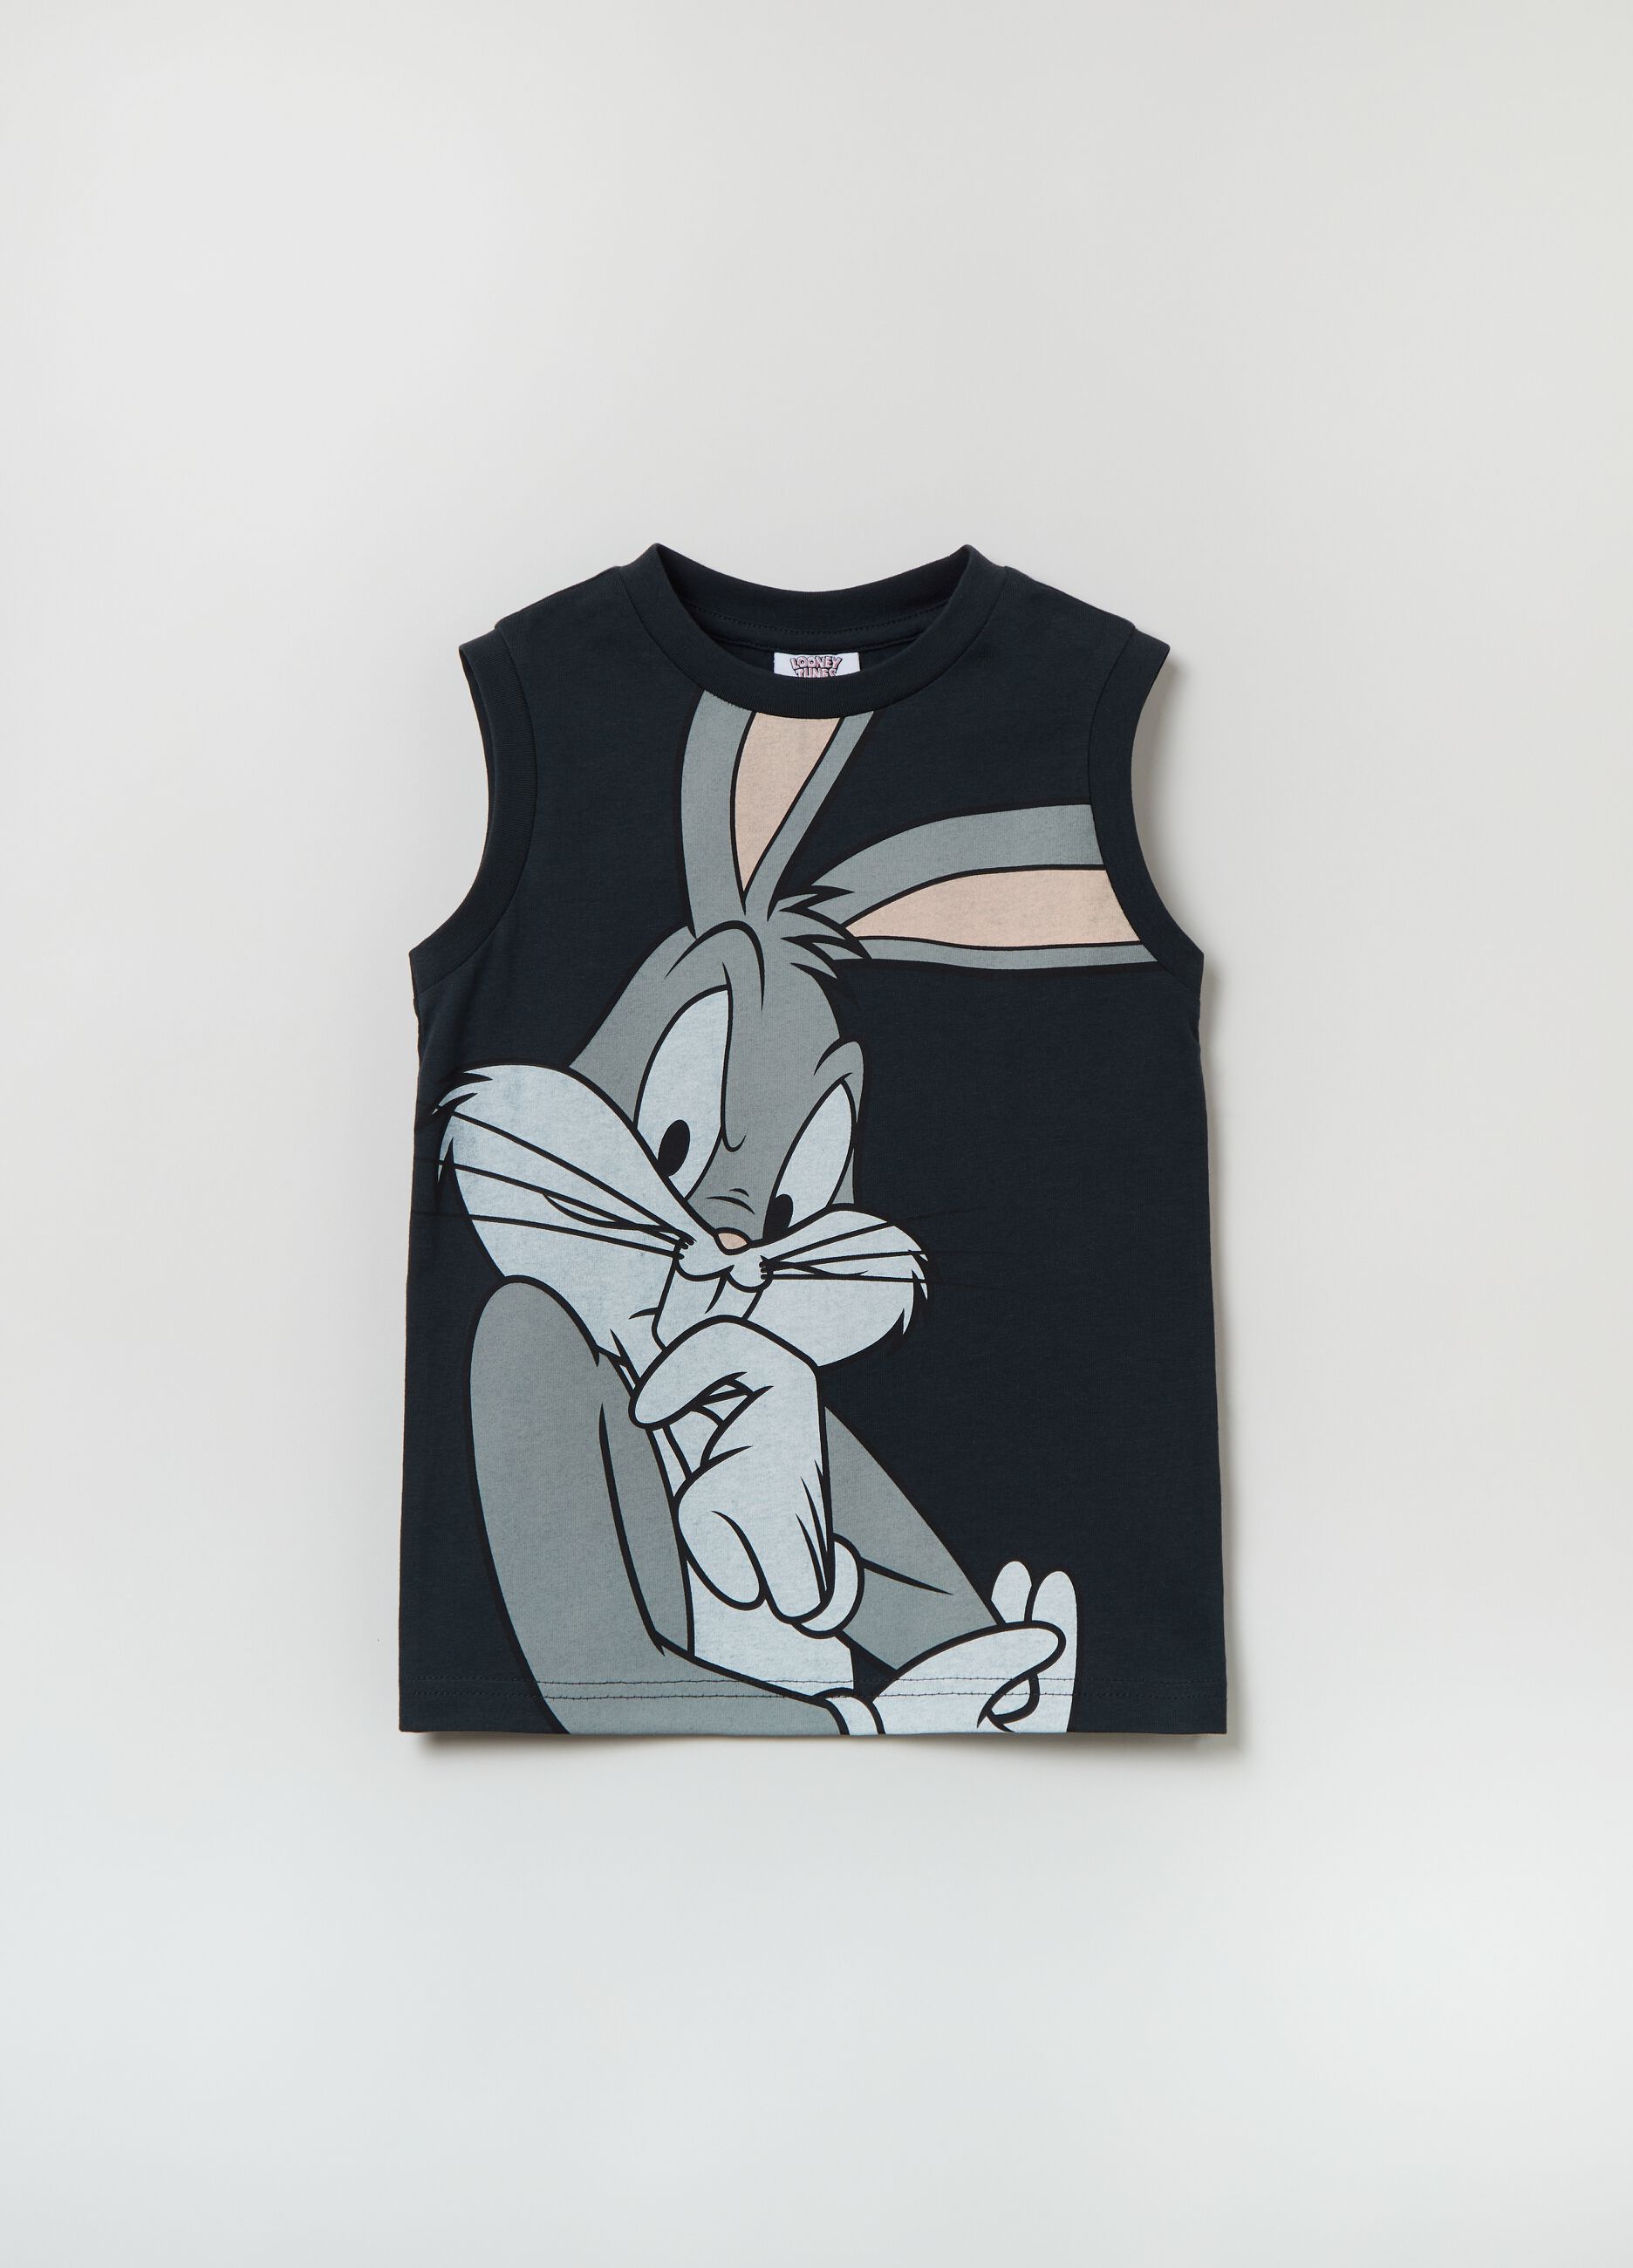 Cotton tank top with Bugs Bunny print